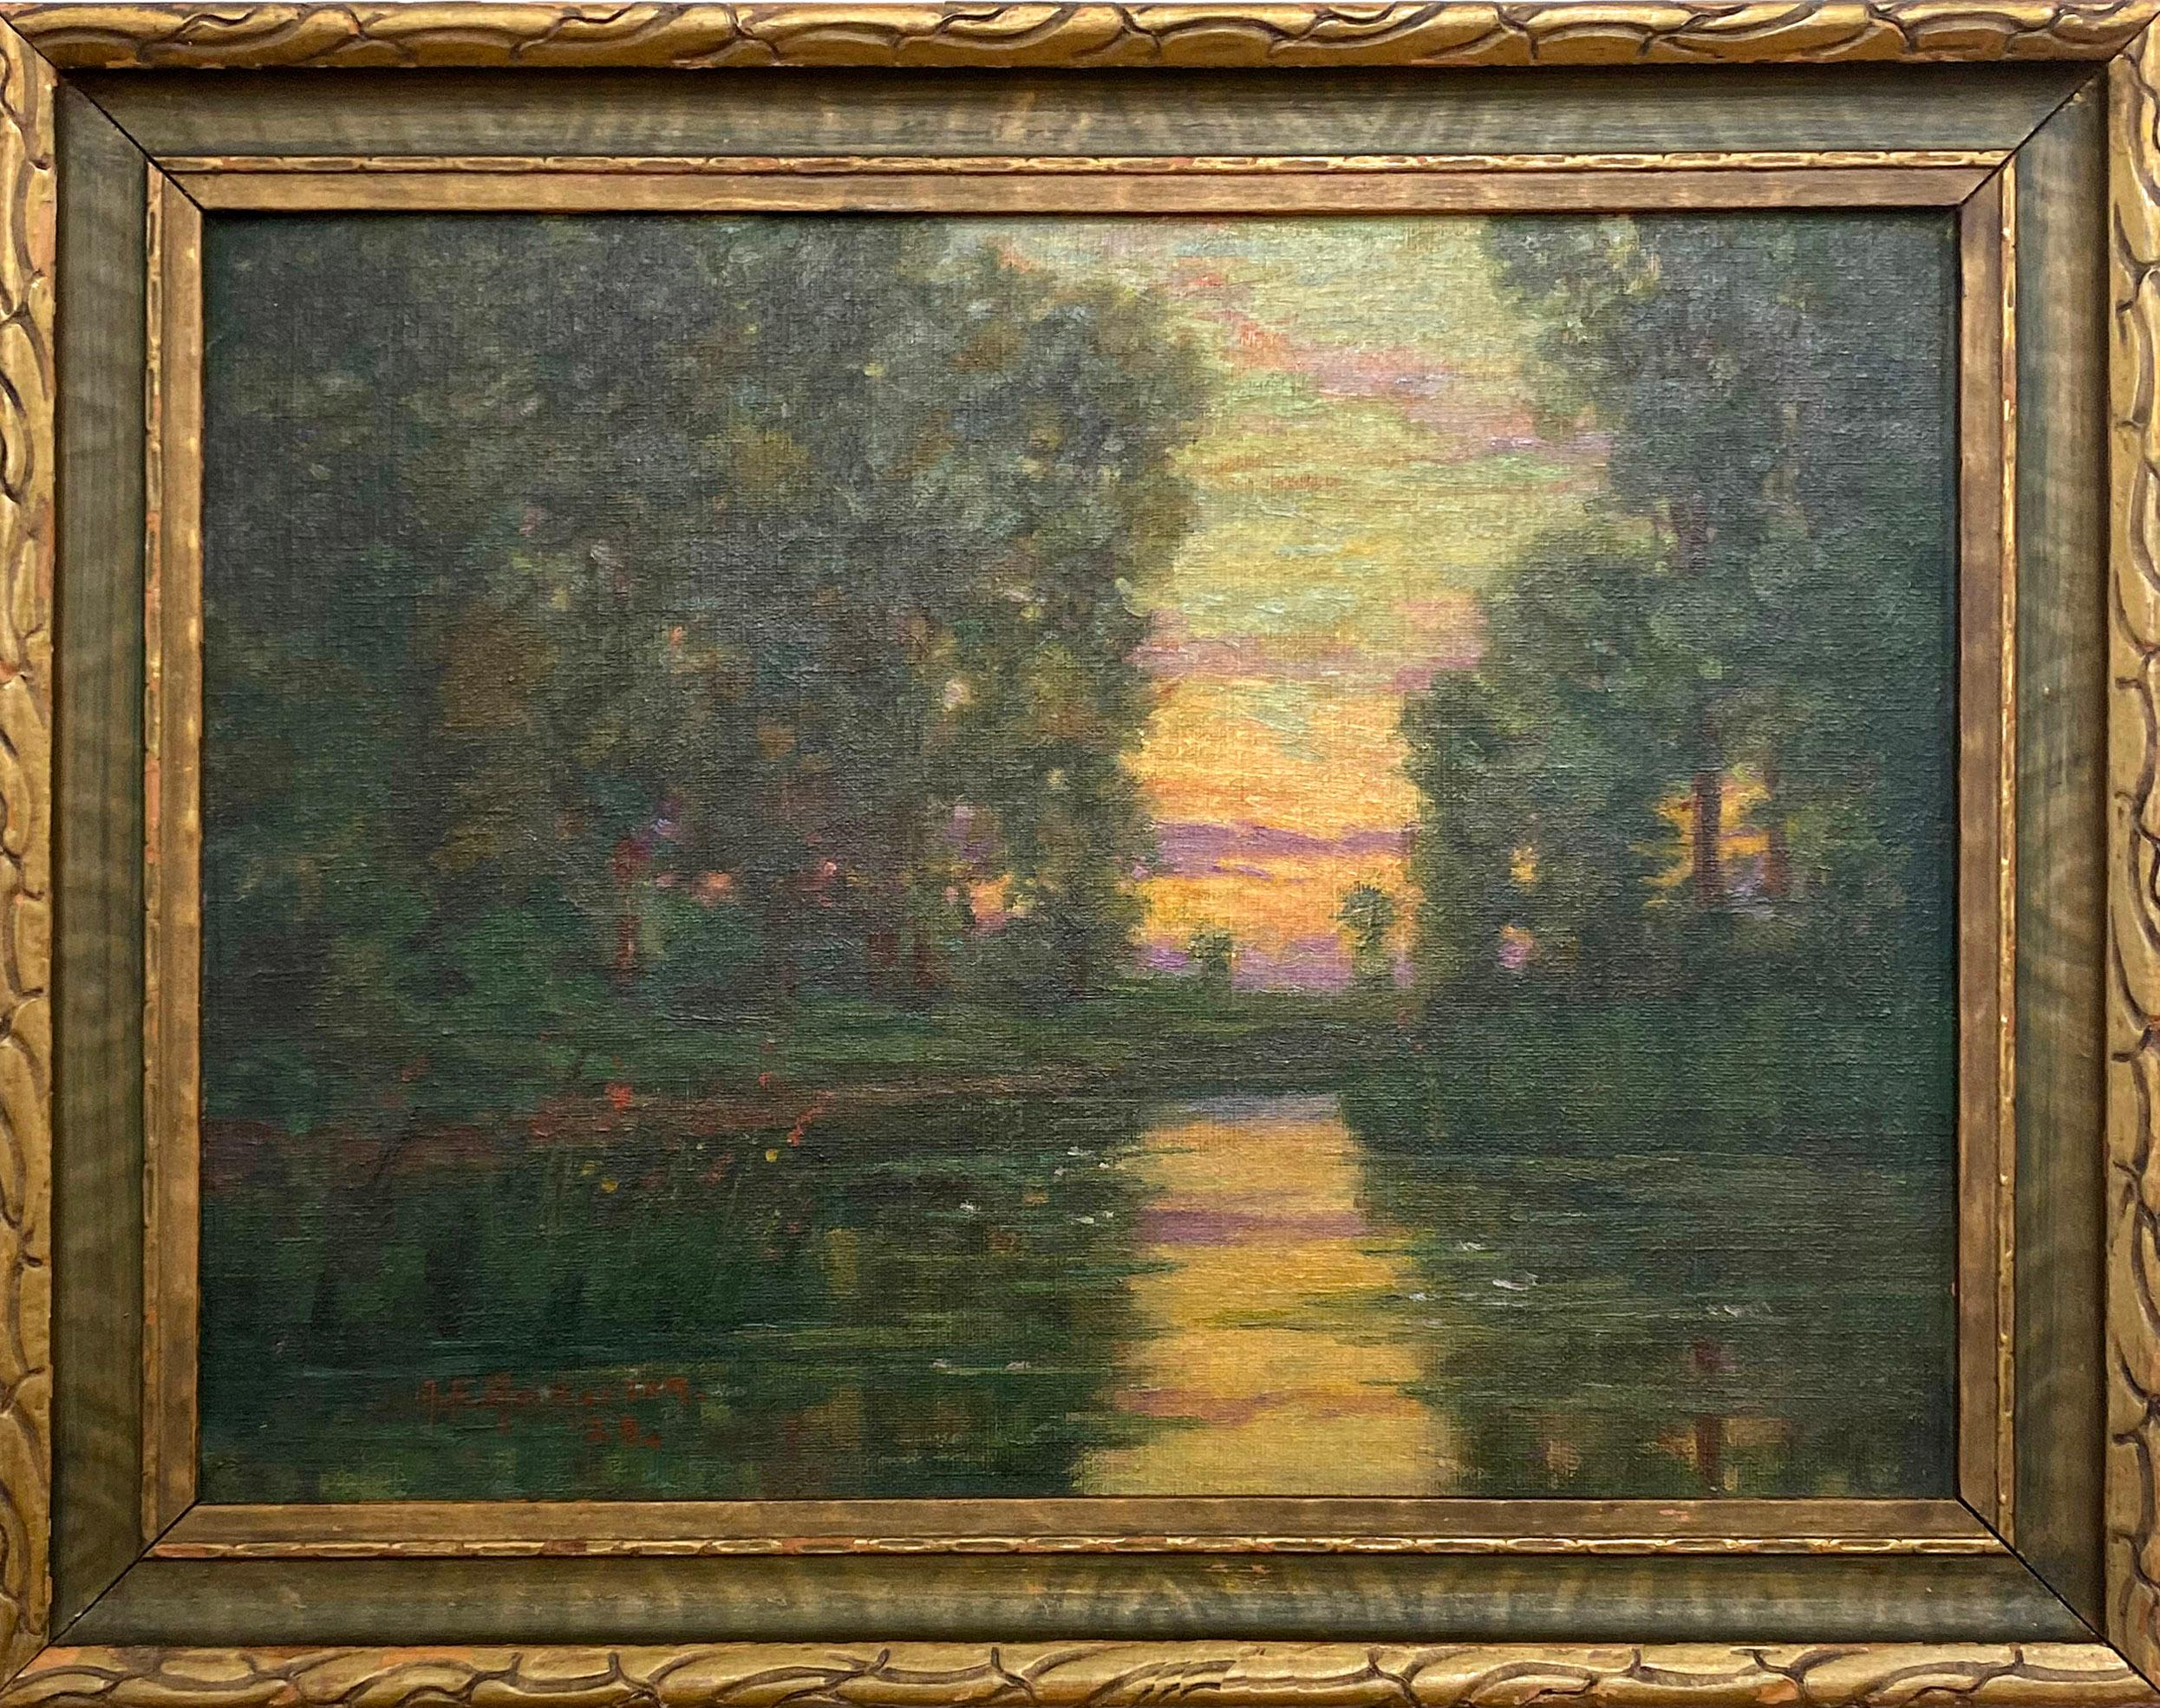 Addie F. Anderson  Landscape Painting - Antique American Impressionist Tonalist Oil Painting Sunset Early dated 1920 